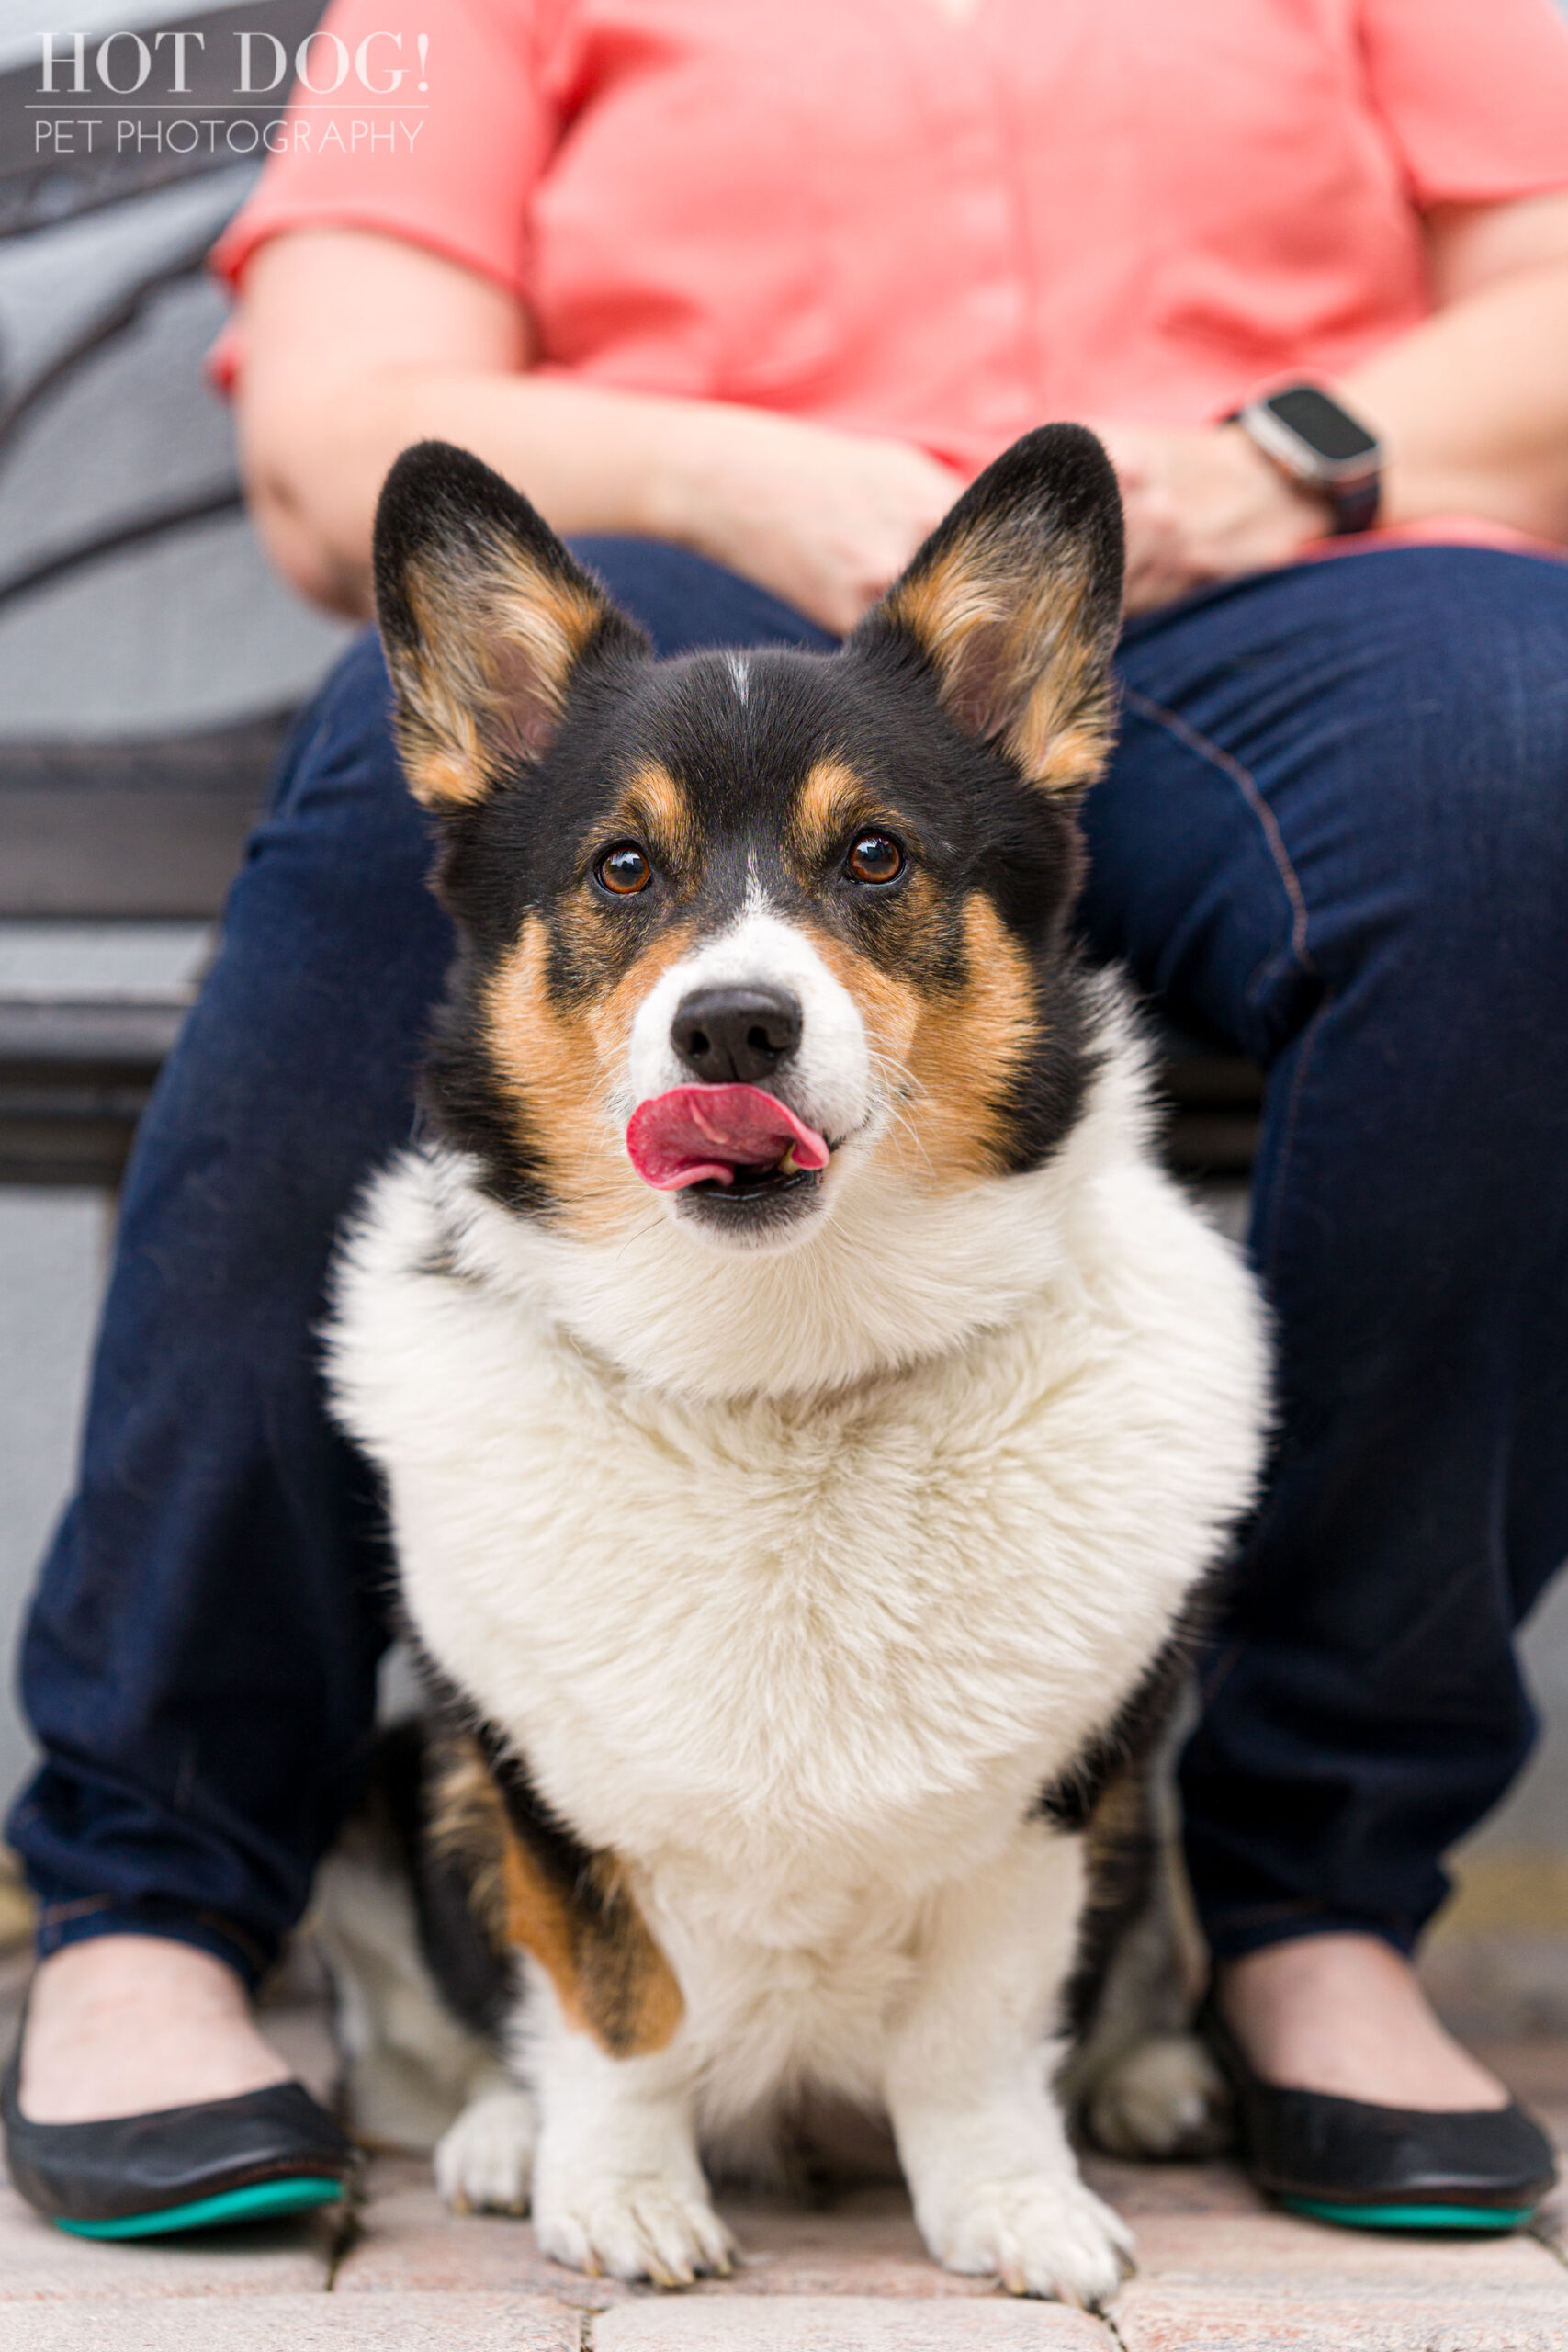 Snap the Pembroke Welsh Corgis is a natural in front of the camera in this professional pet photo session by Hot Dog! Pet Photography.